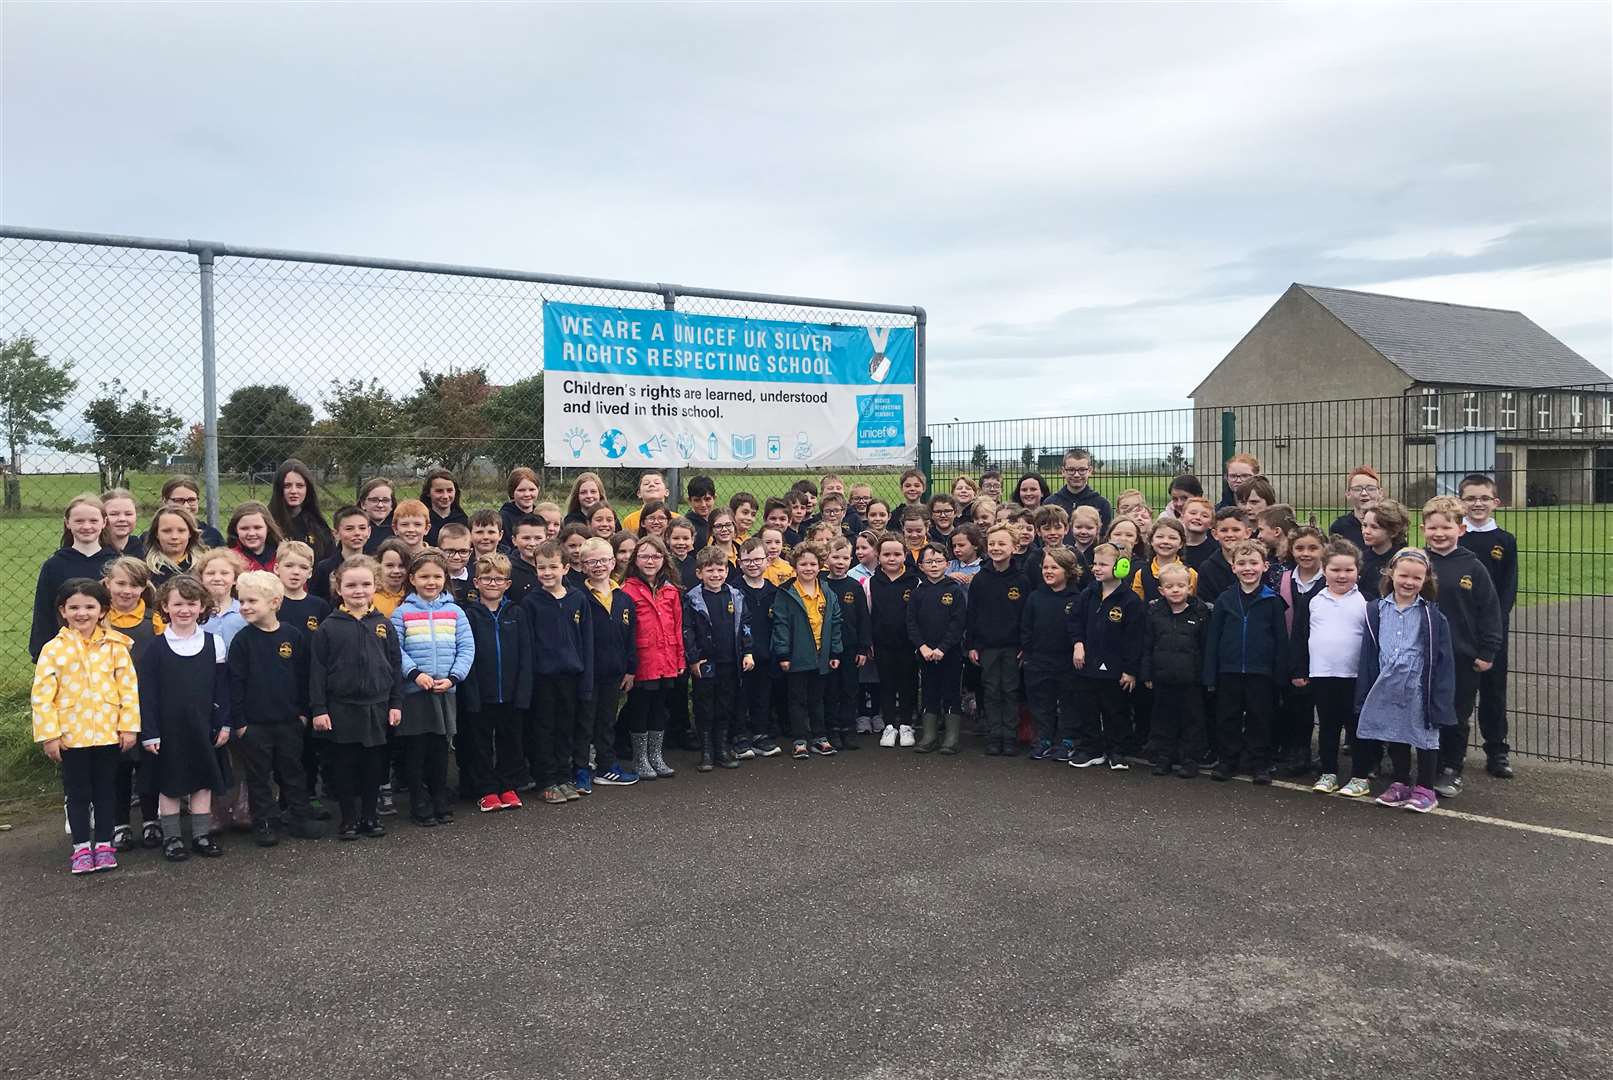 Halkirk primary pupils showing off the Rights Respecting School banner the school received.